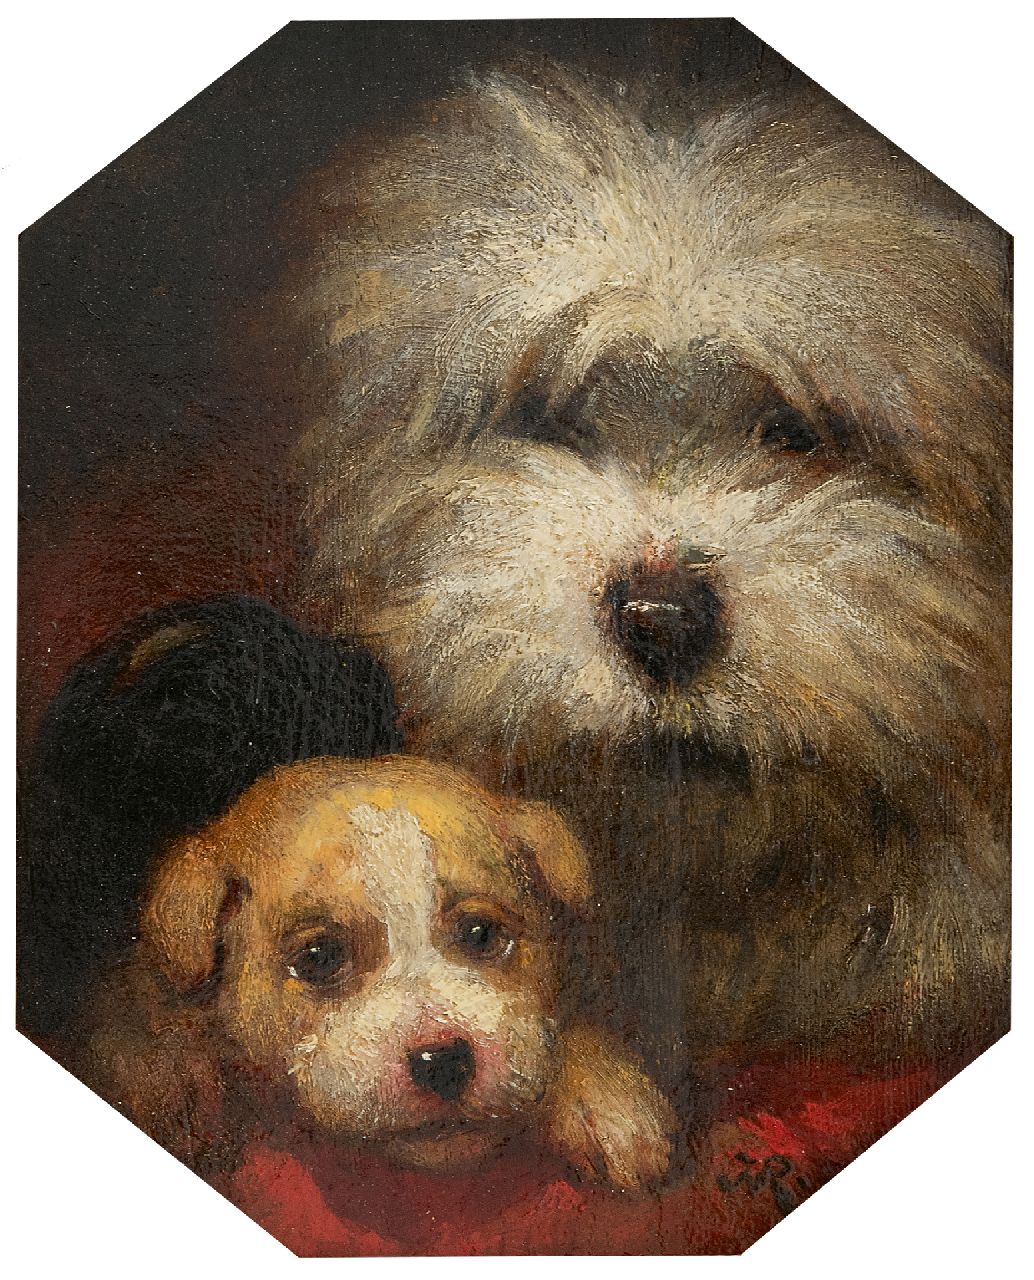 Ronner-Knip H.  | Henriette Ronner-Knip | Paintings offered for sale | Two dog heads, oil on panel 20.8 x 17.0 cm, signed l.r. with monogram